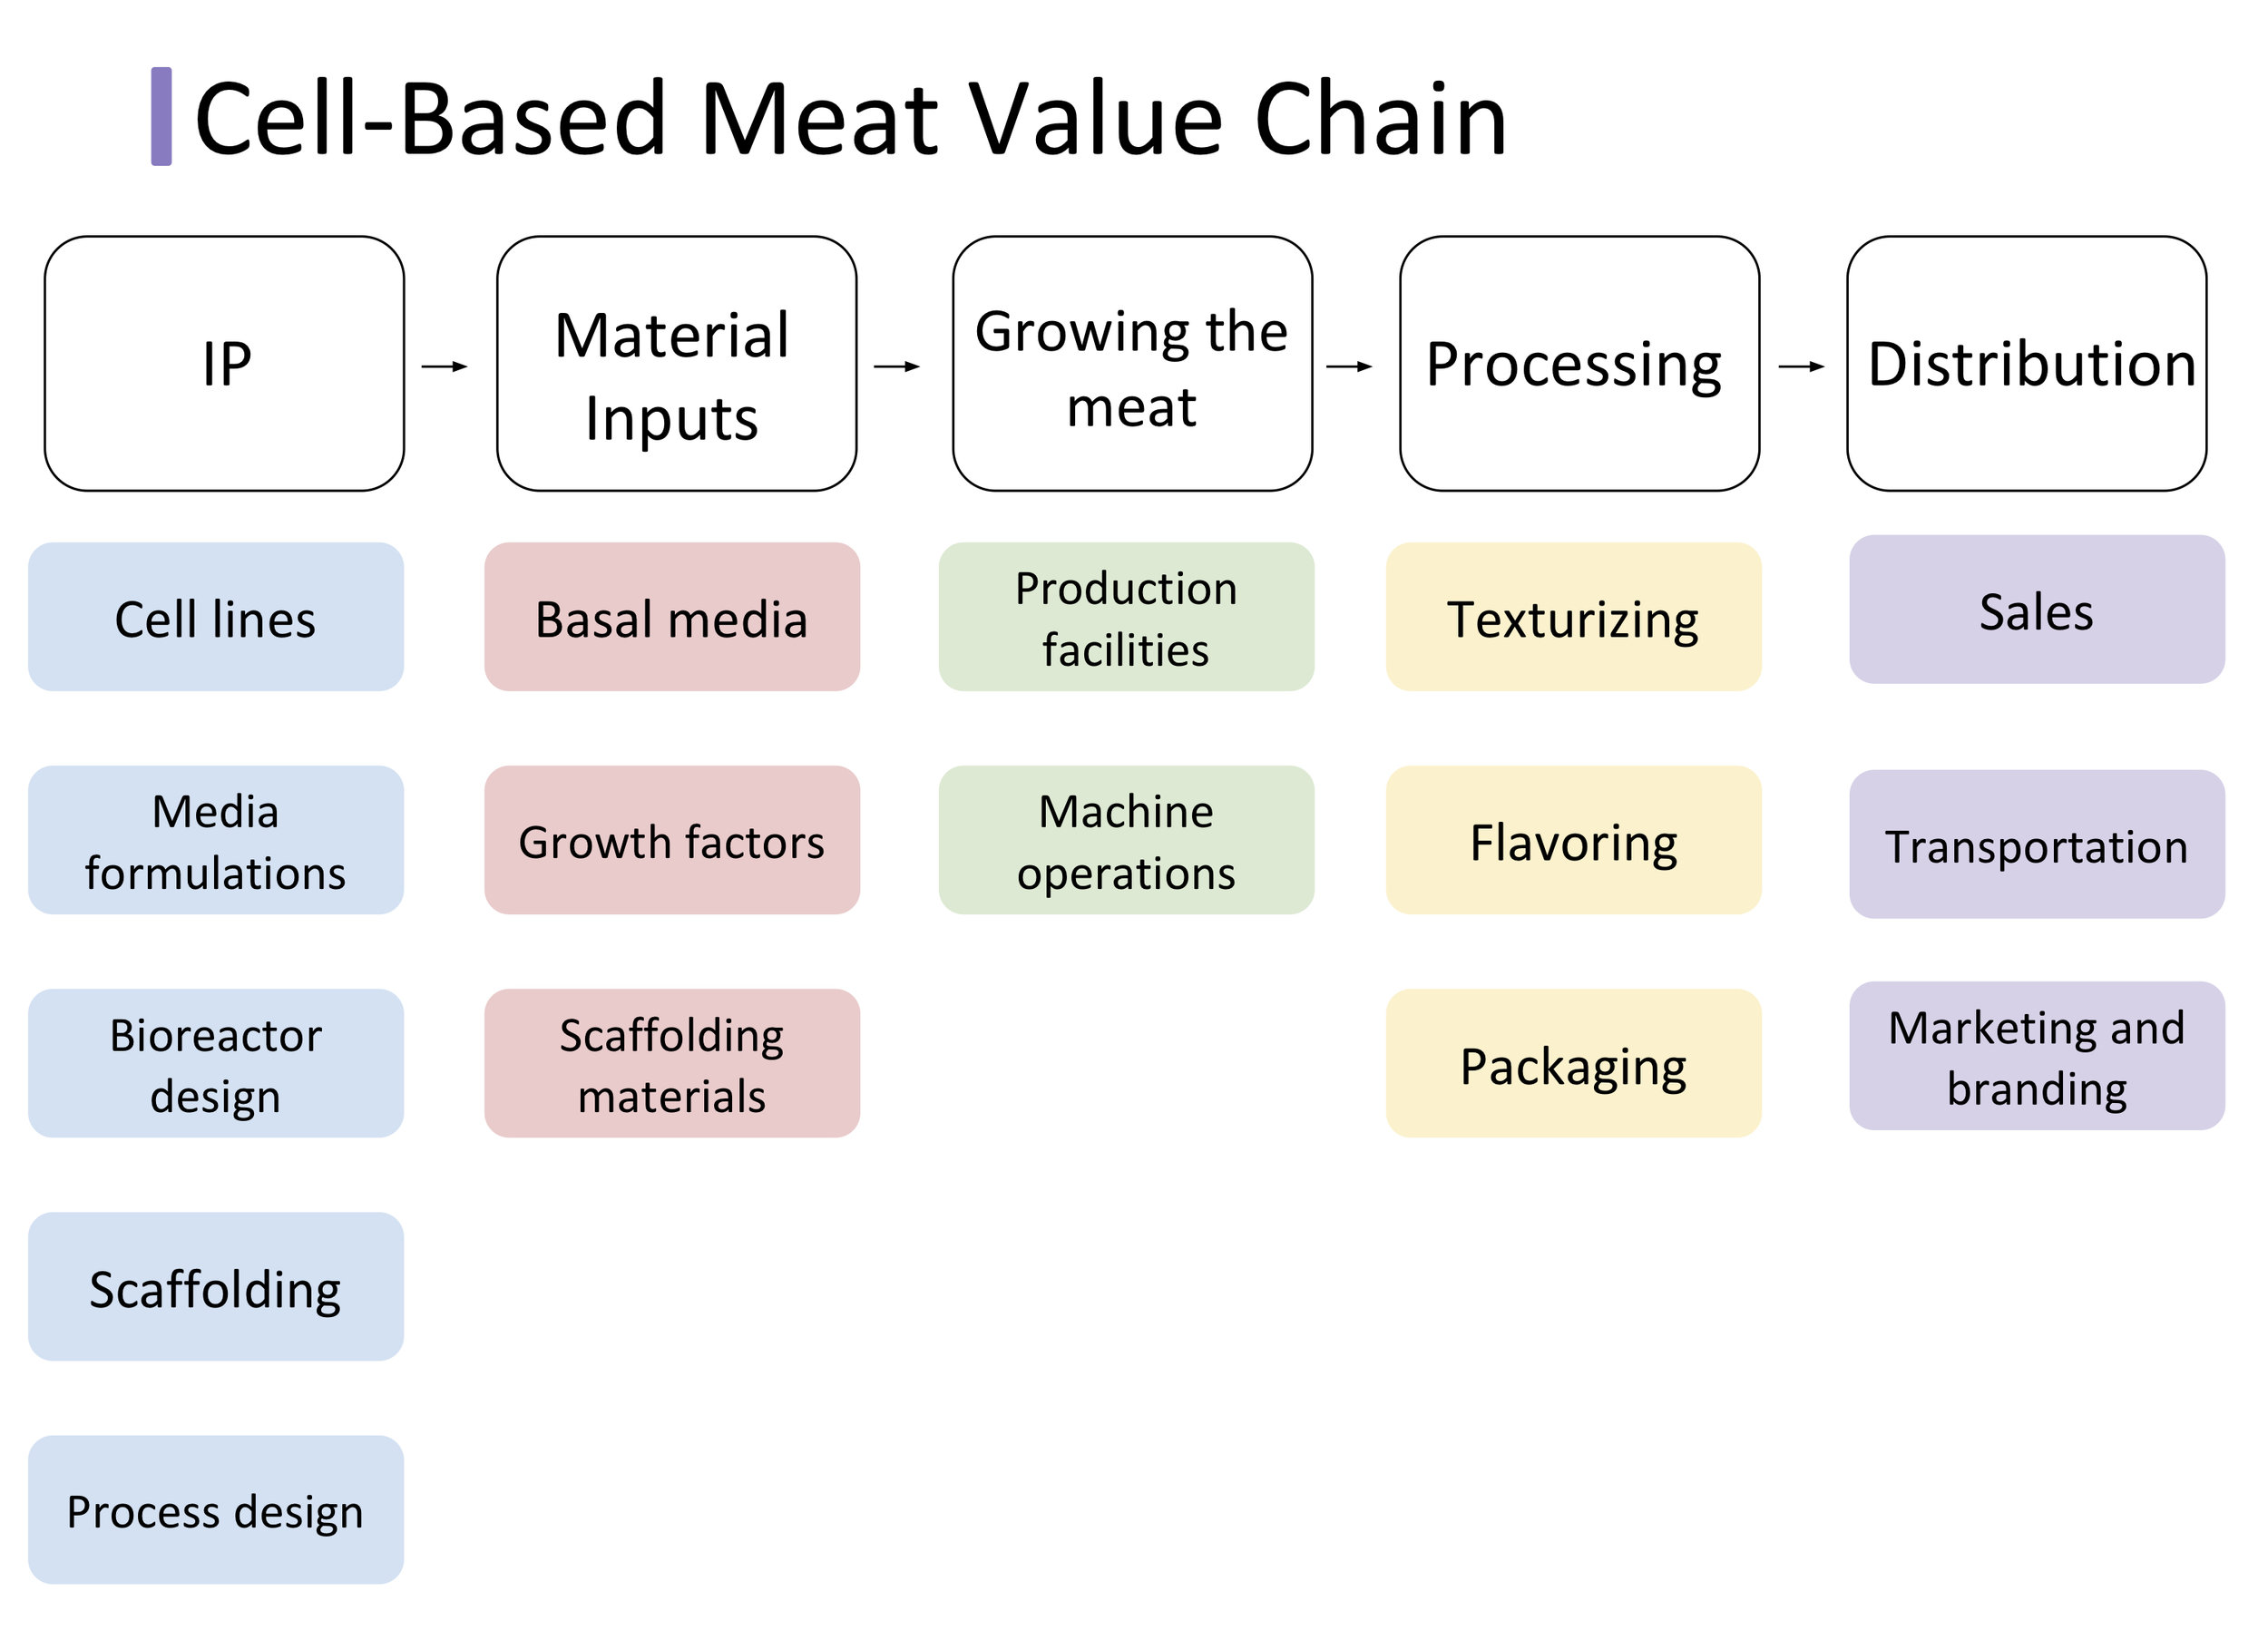 Materials and methods. Plant based сертификация. Dell's value Chain. Material and methods. Type of processing.